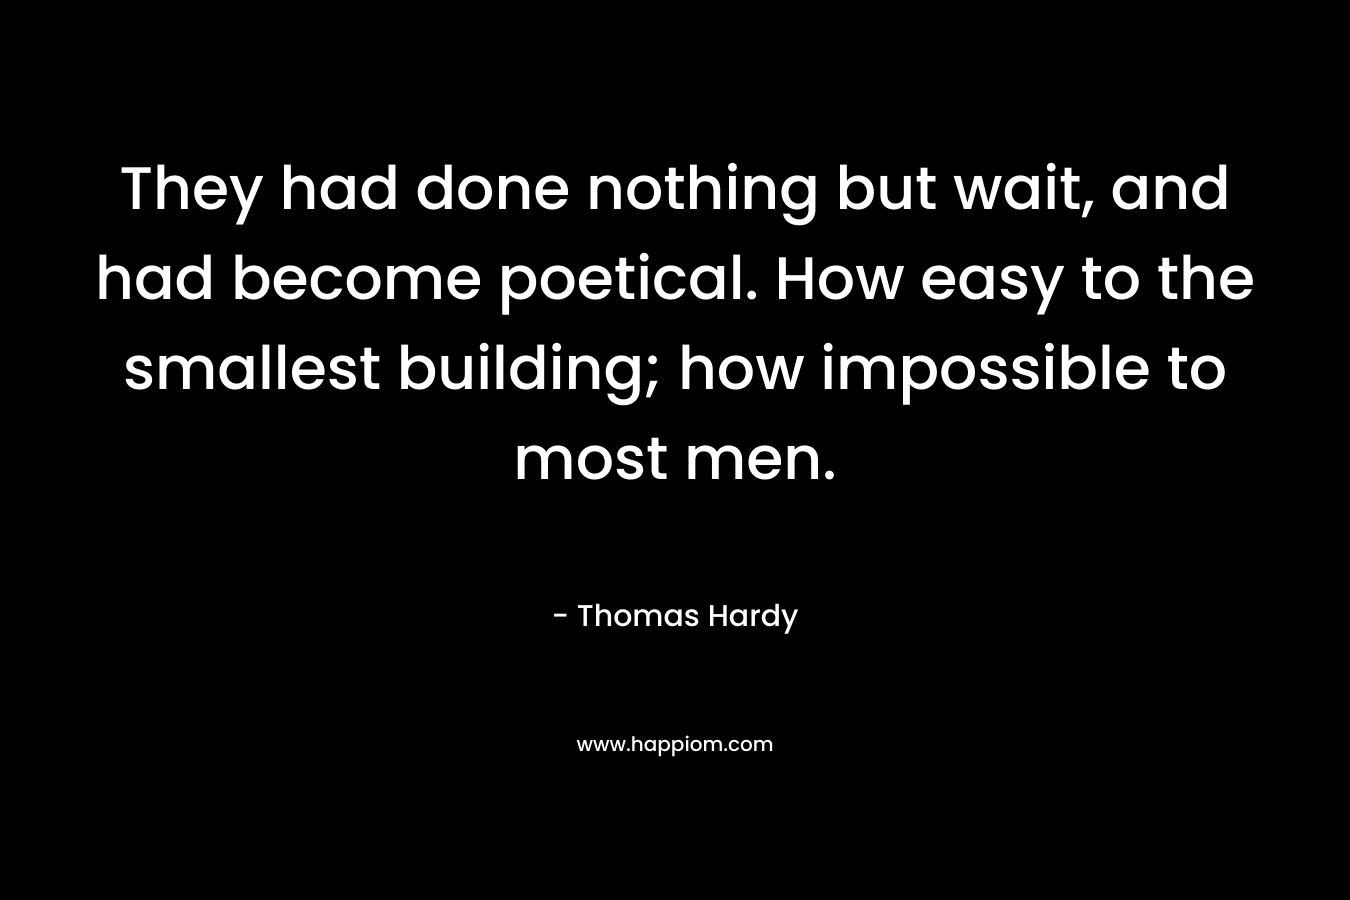 They had done nothing but wait, and had become poetical. How easy to the smallest building; how impossible to most men. – Thomas Hardy